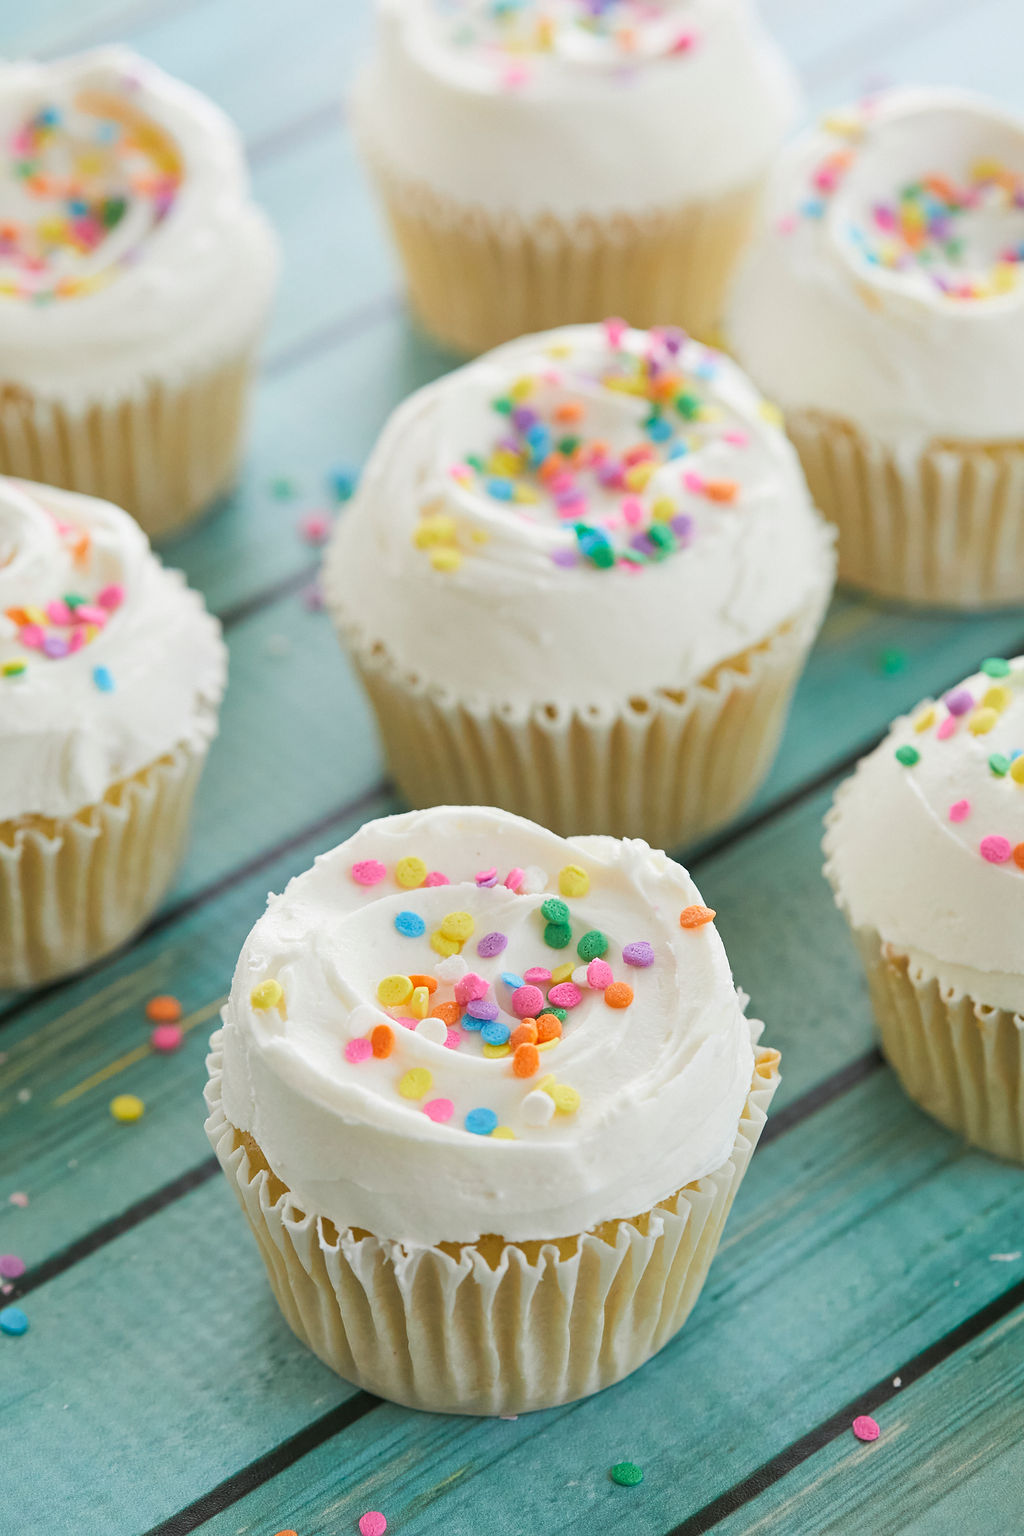 Vanilla cupcakes topped with buttercream and colorful sprinkles.